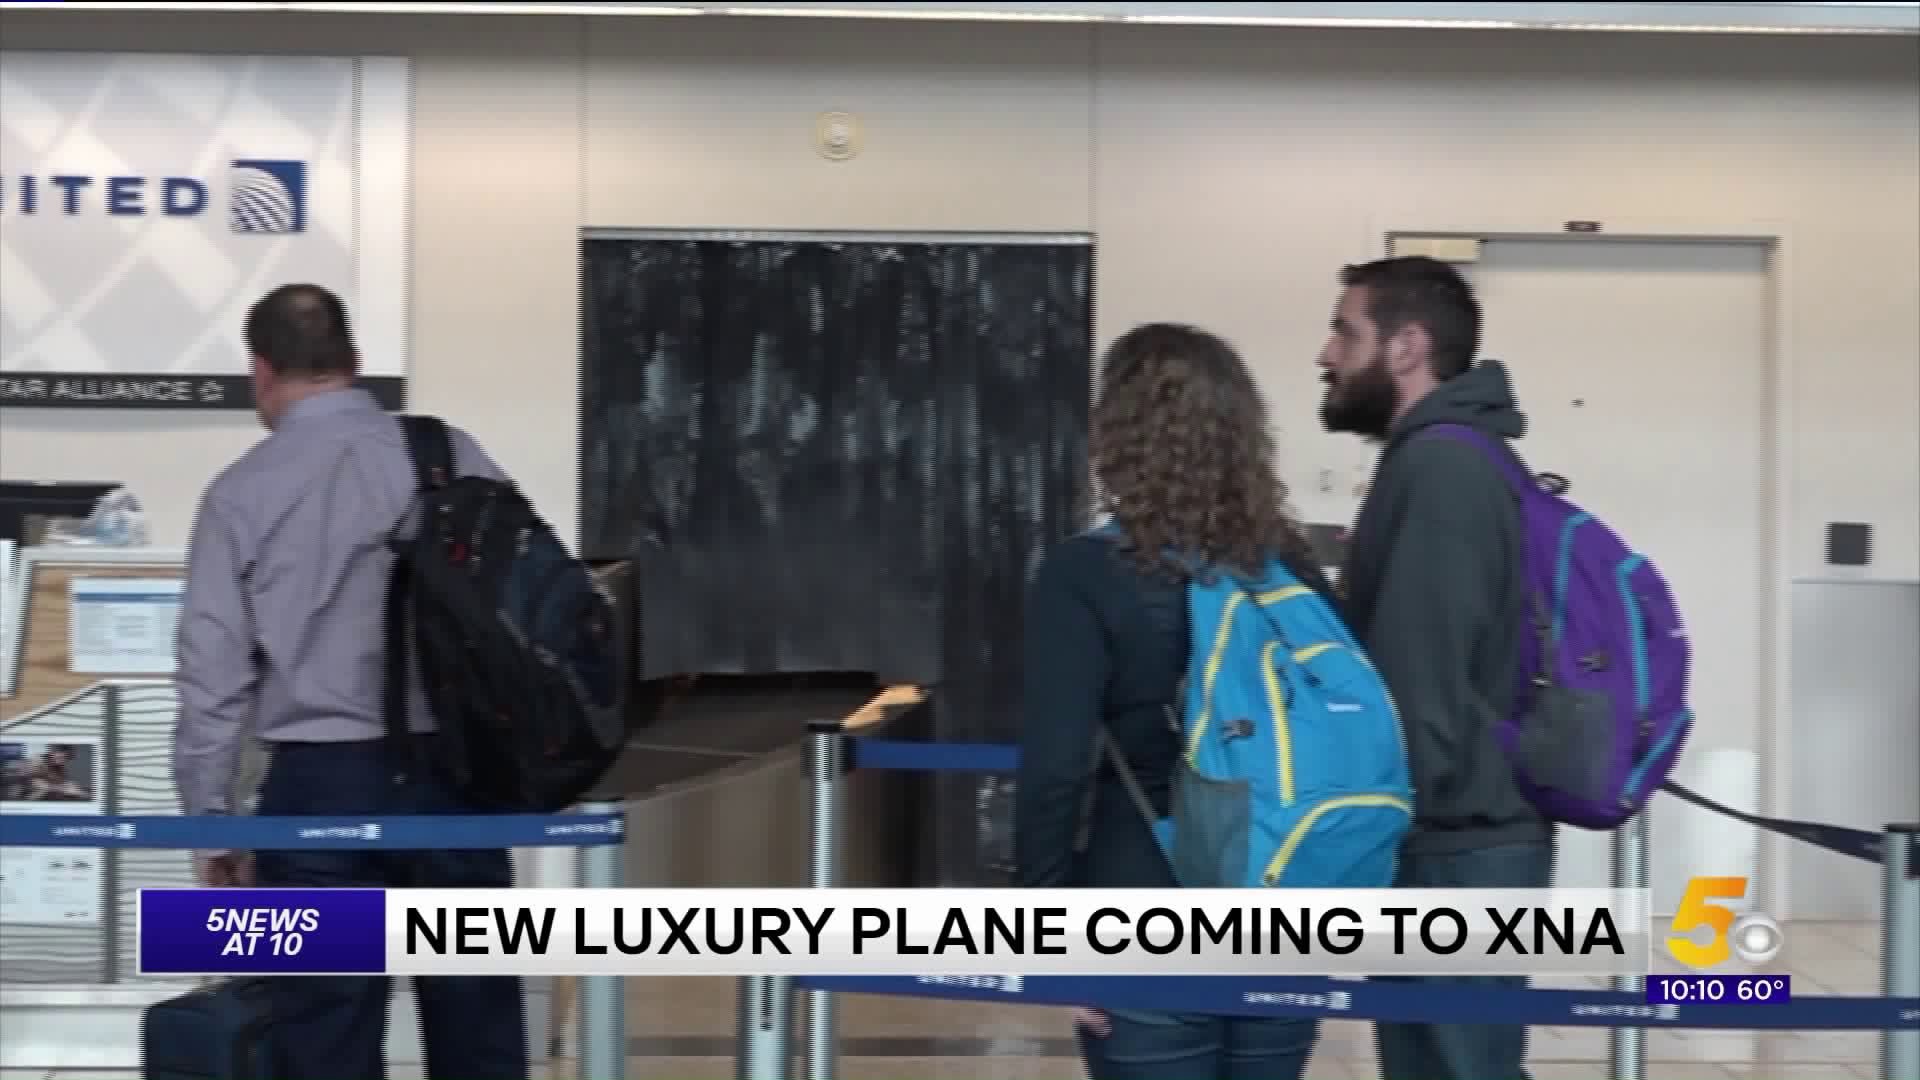 United Airlines Bringing Luxury Plane To XNA